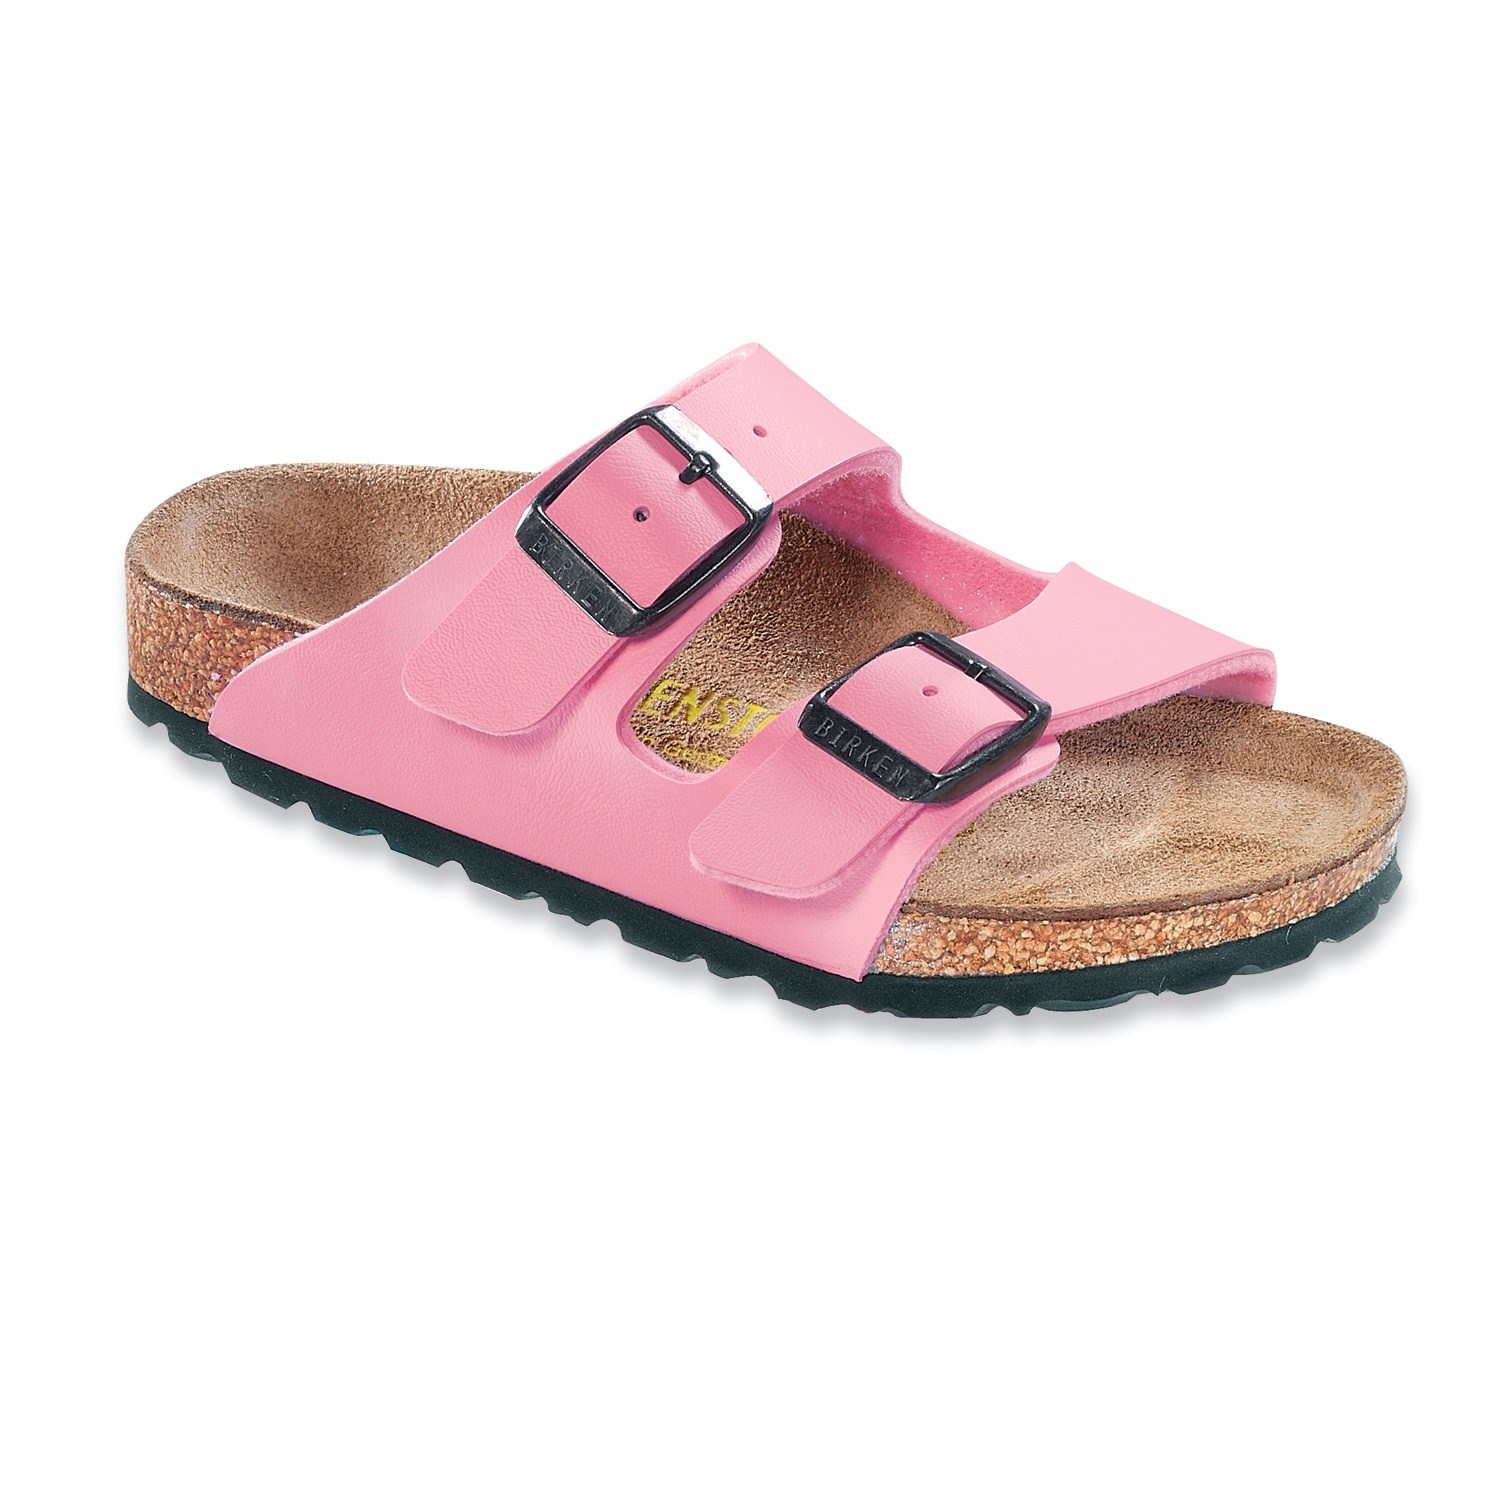 Birkenstock Arizona For Kids - Slippers - Everyday shoes - Shoes ...